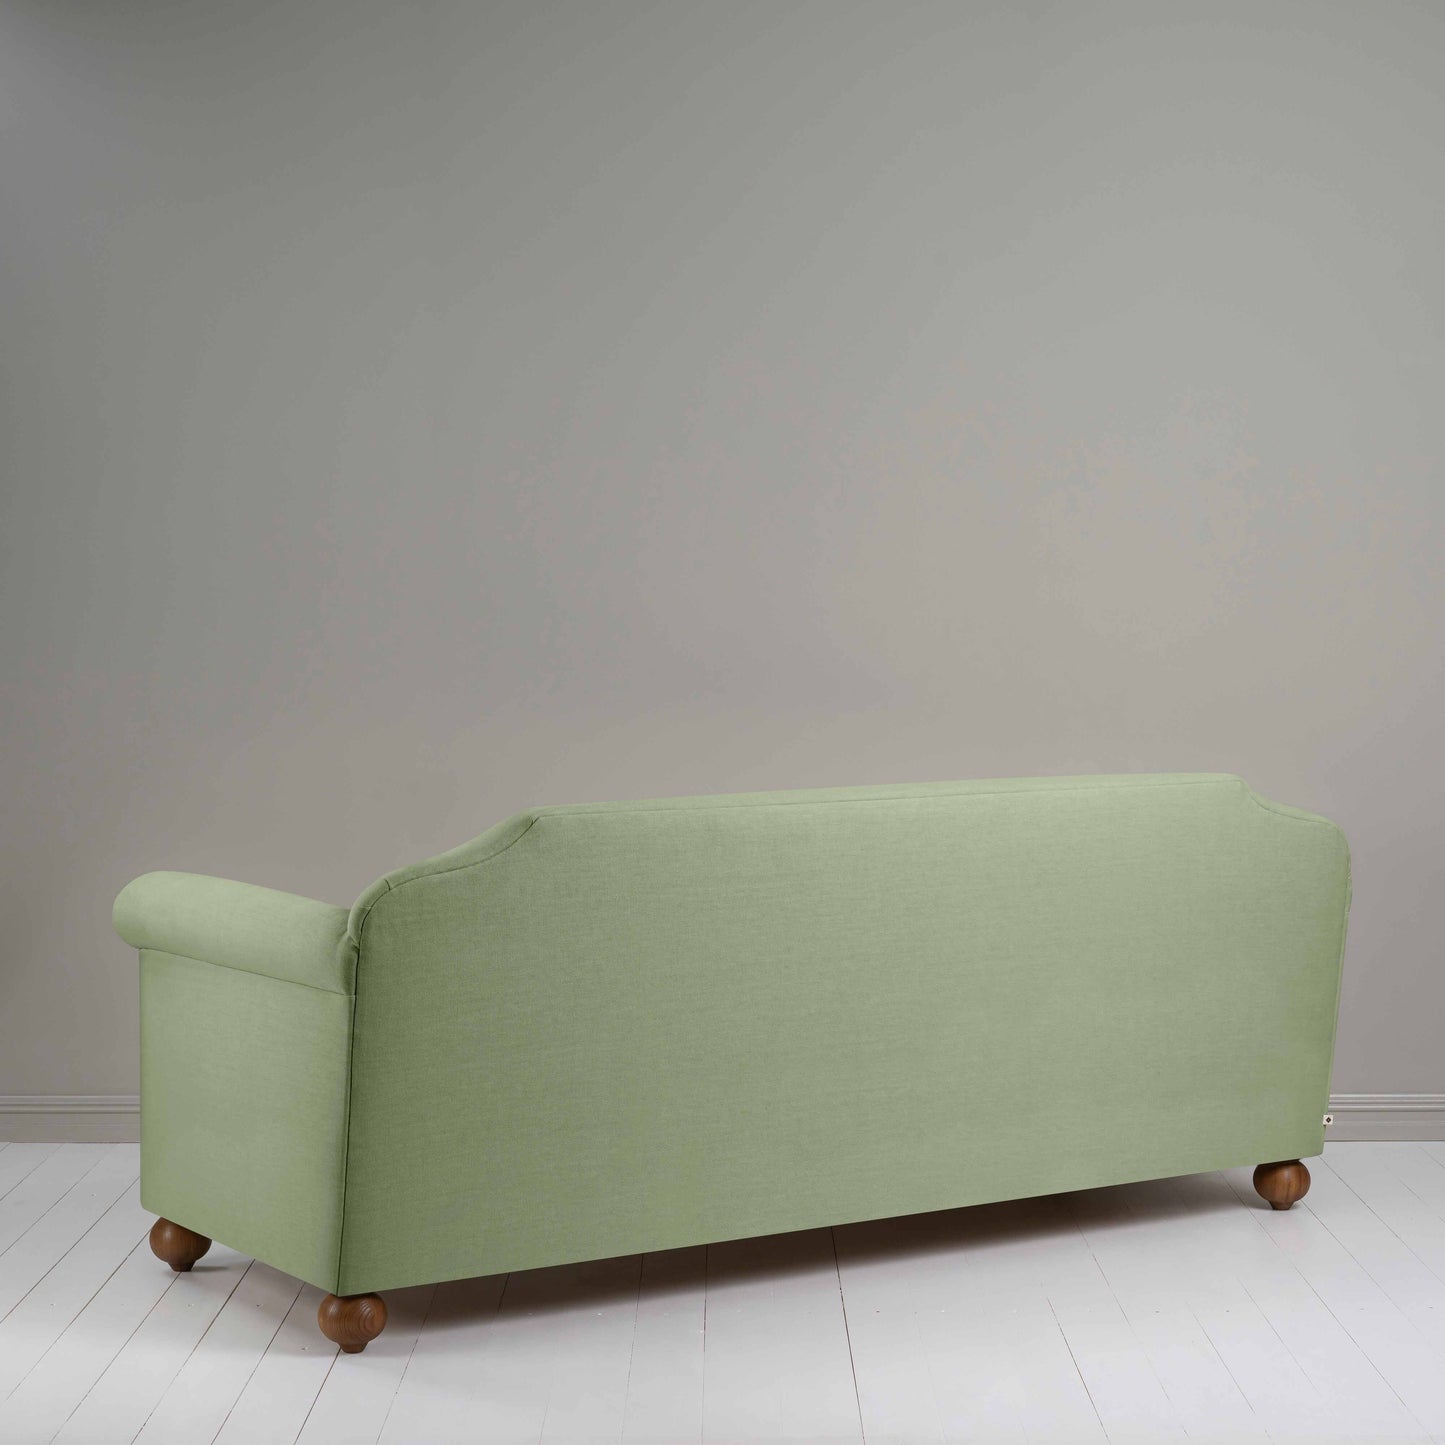 Dolittle 4 seater Sofa in Laidback Linen Moss